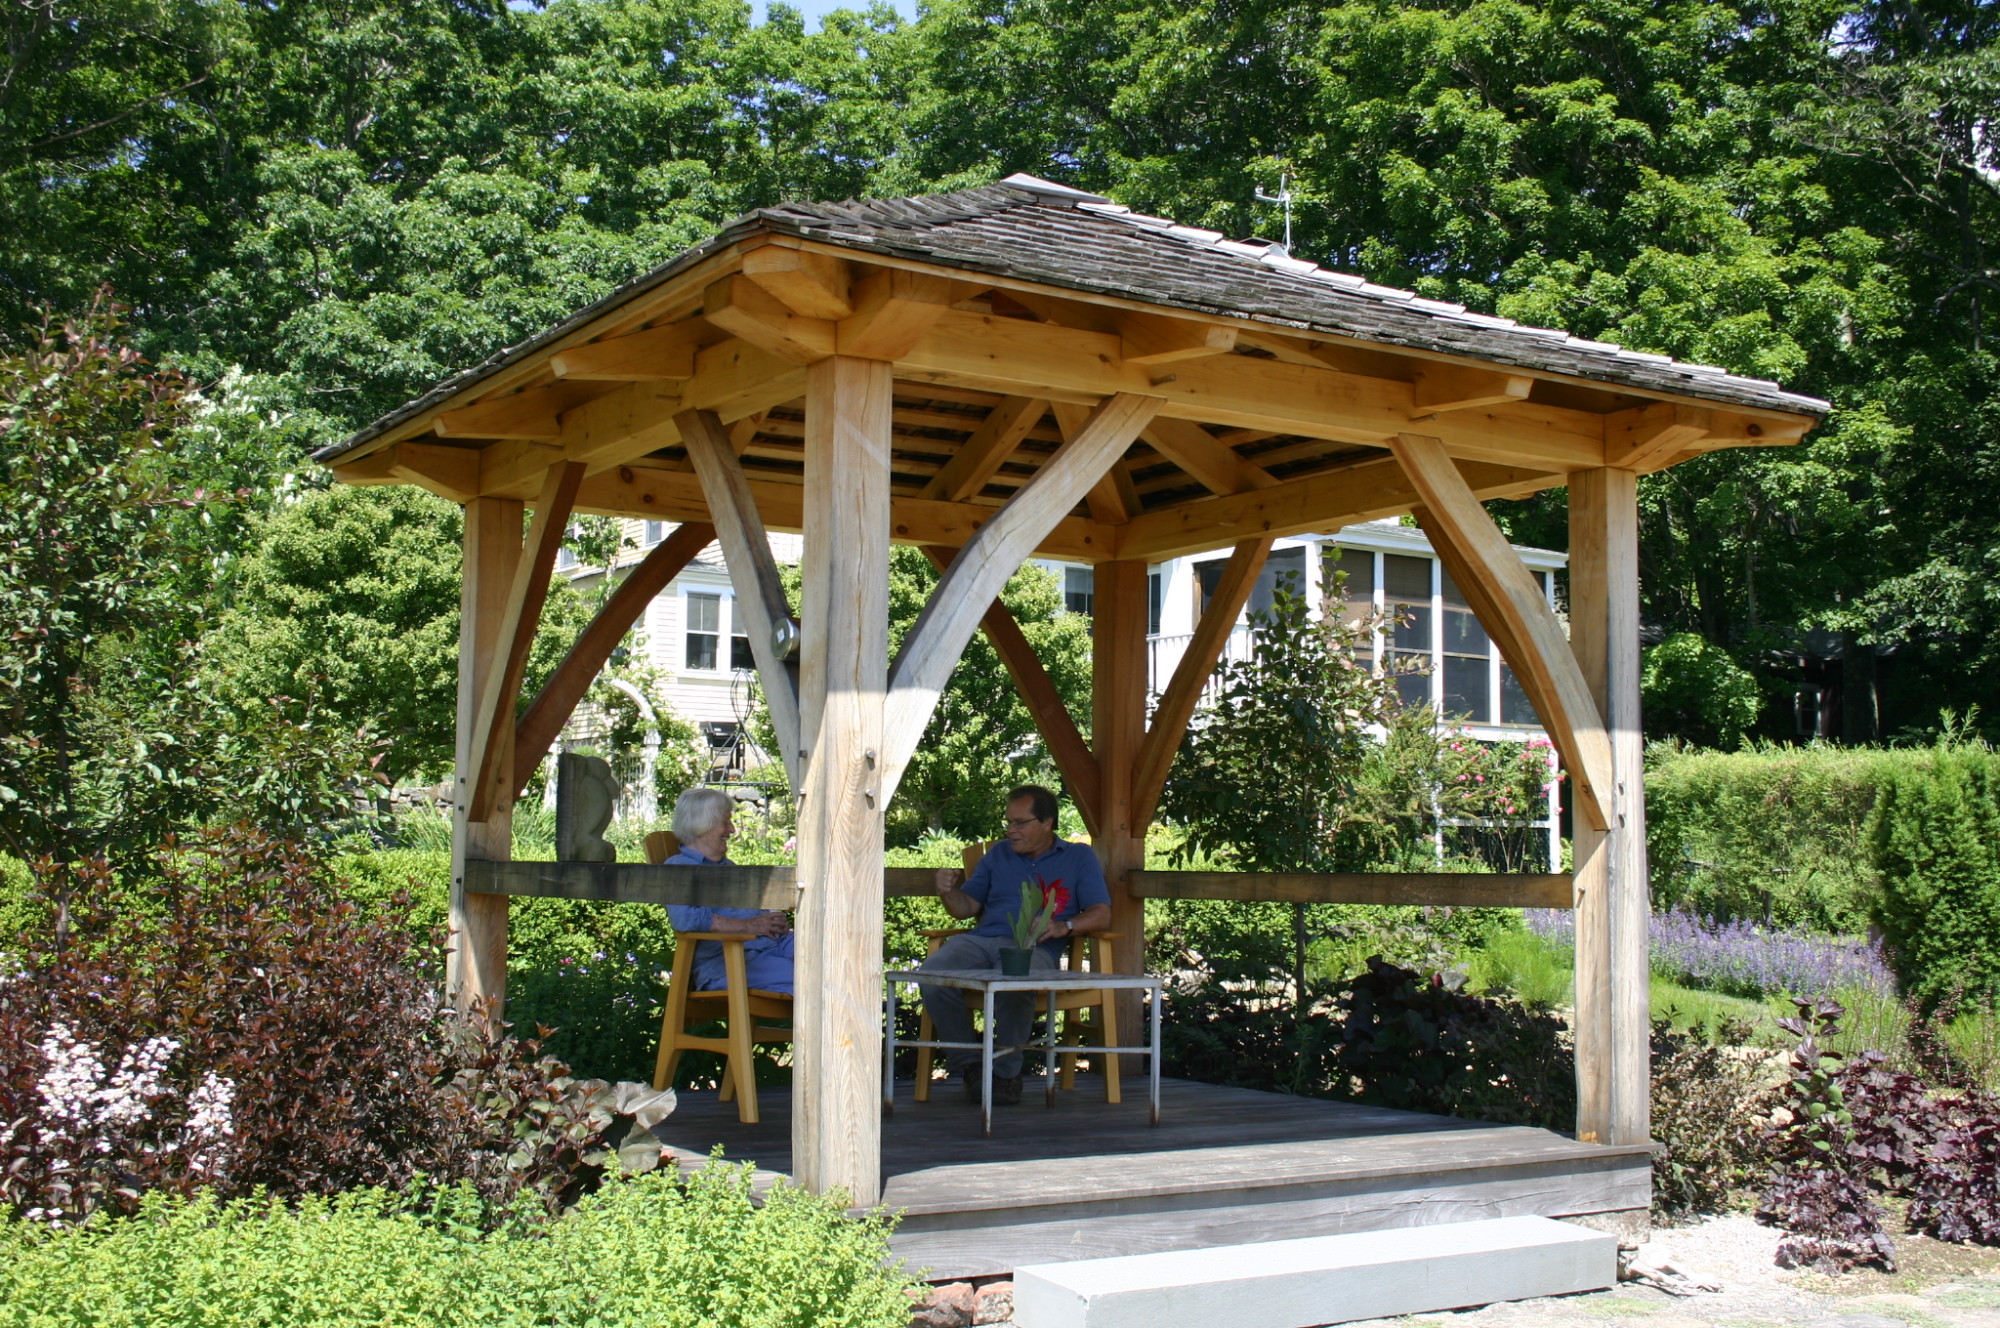 Gallery of Gazebos and Pavilions